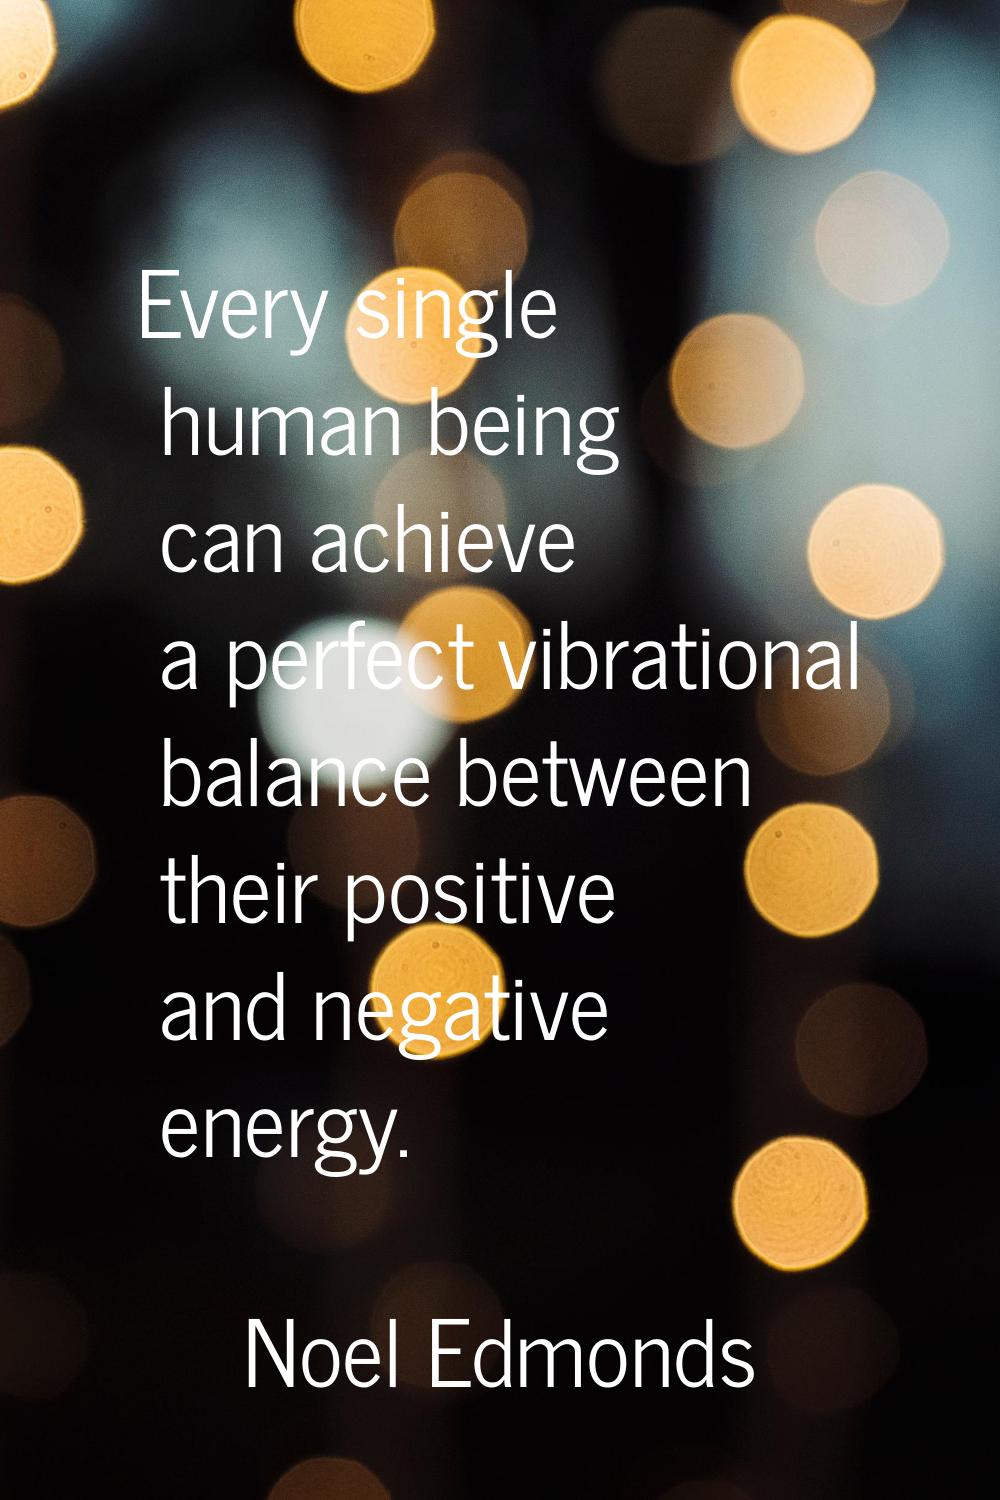 Every single human being can achieve a perfect vibrational balance between their positive and negat